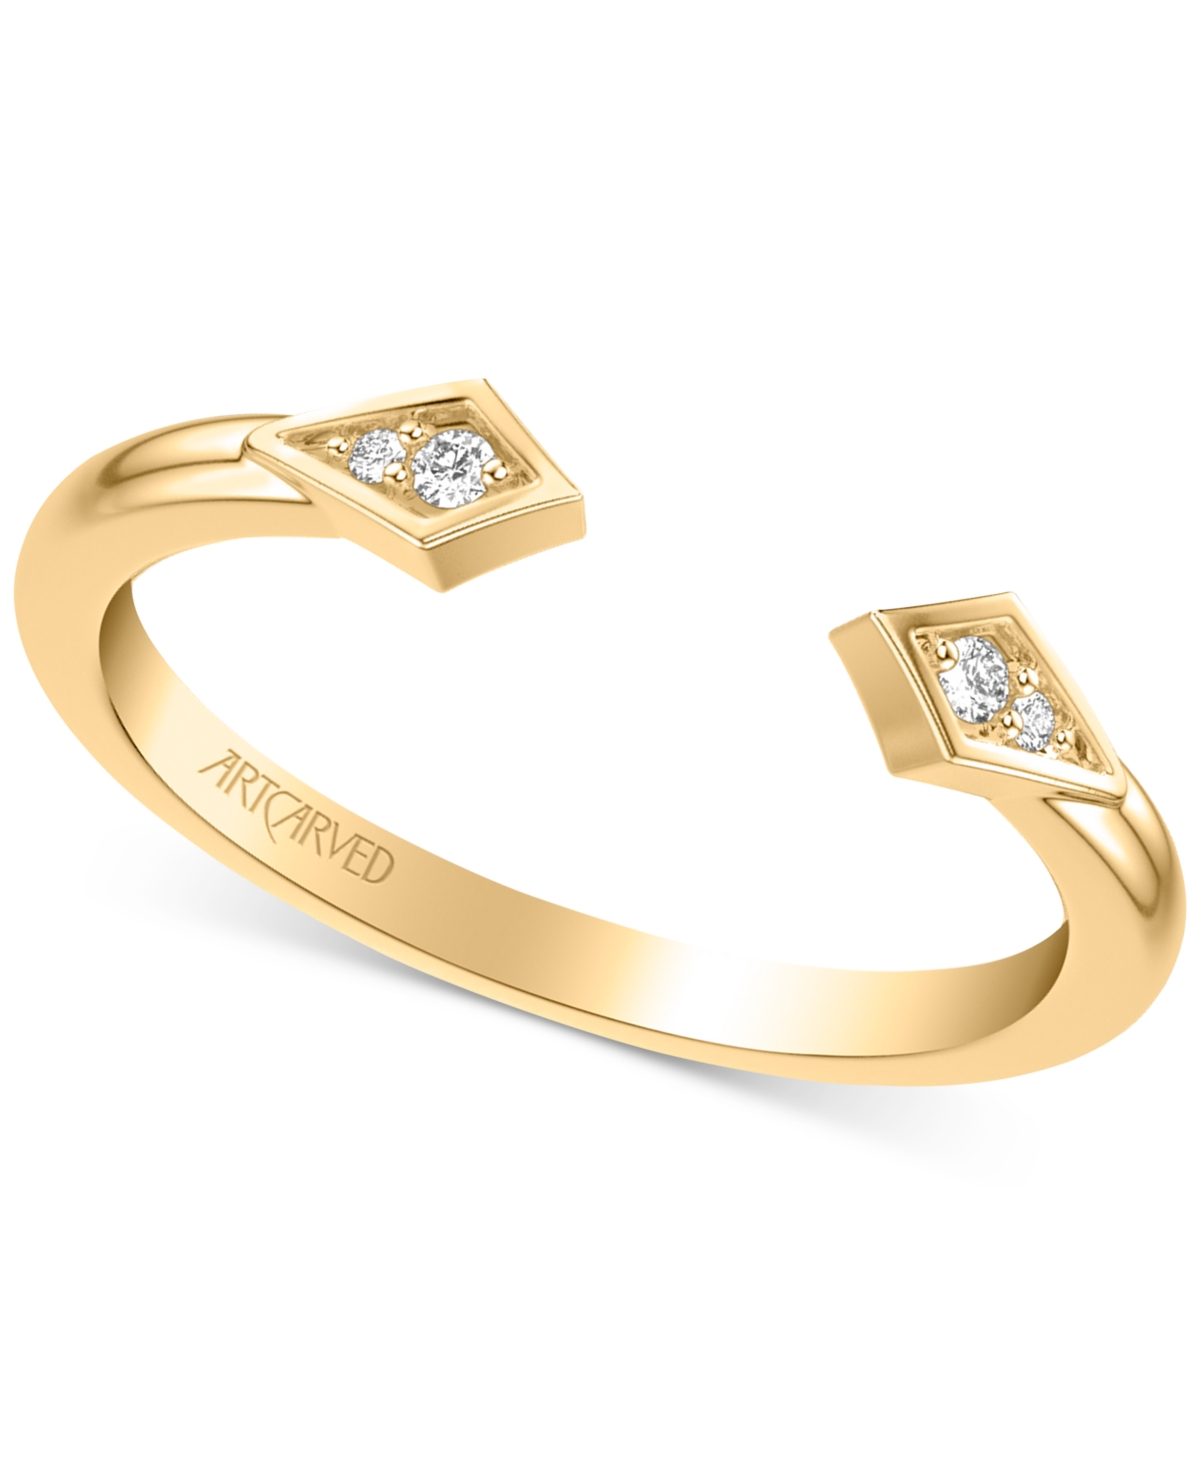 Artcarved Art Carved Diamond Rose-Cut Cuff Wedding Band (1/20 ct. t.w.) in 14k White, Yellow or Rose Gold